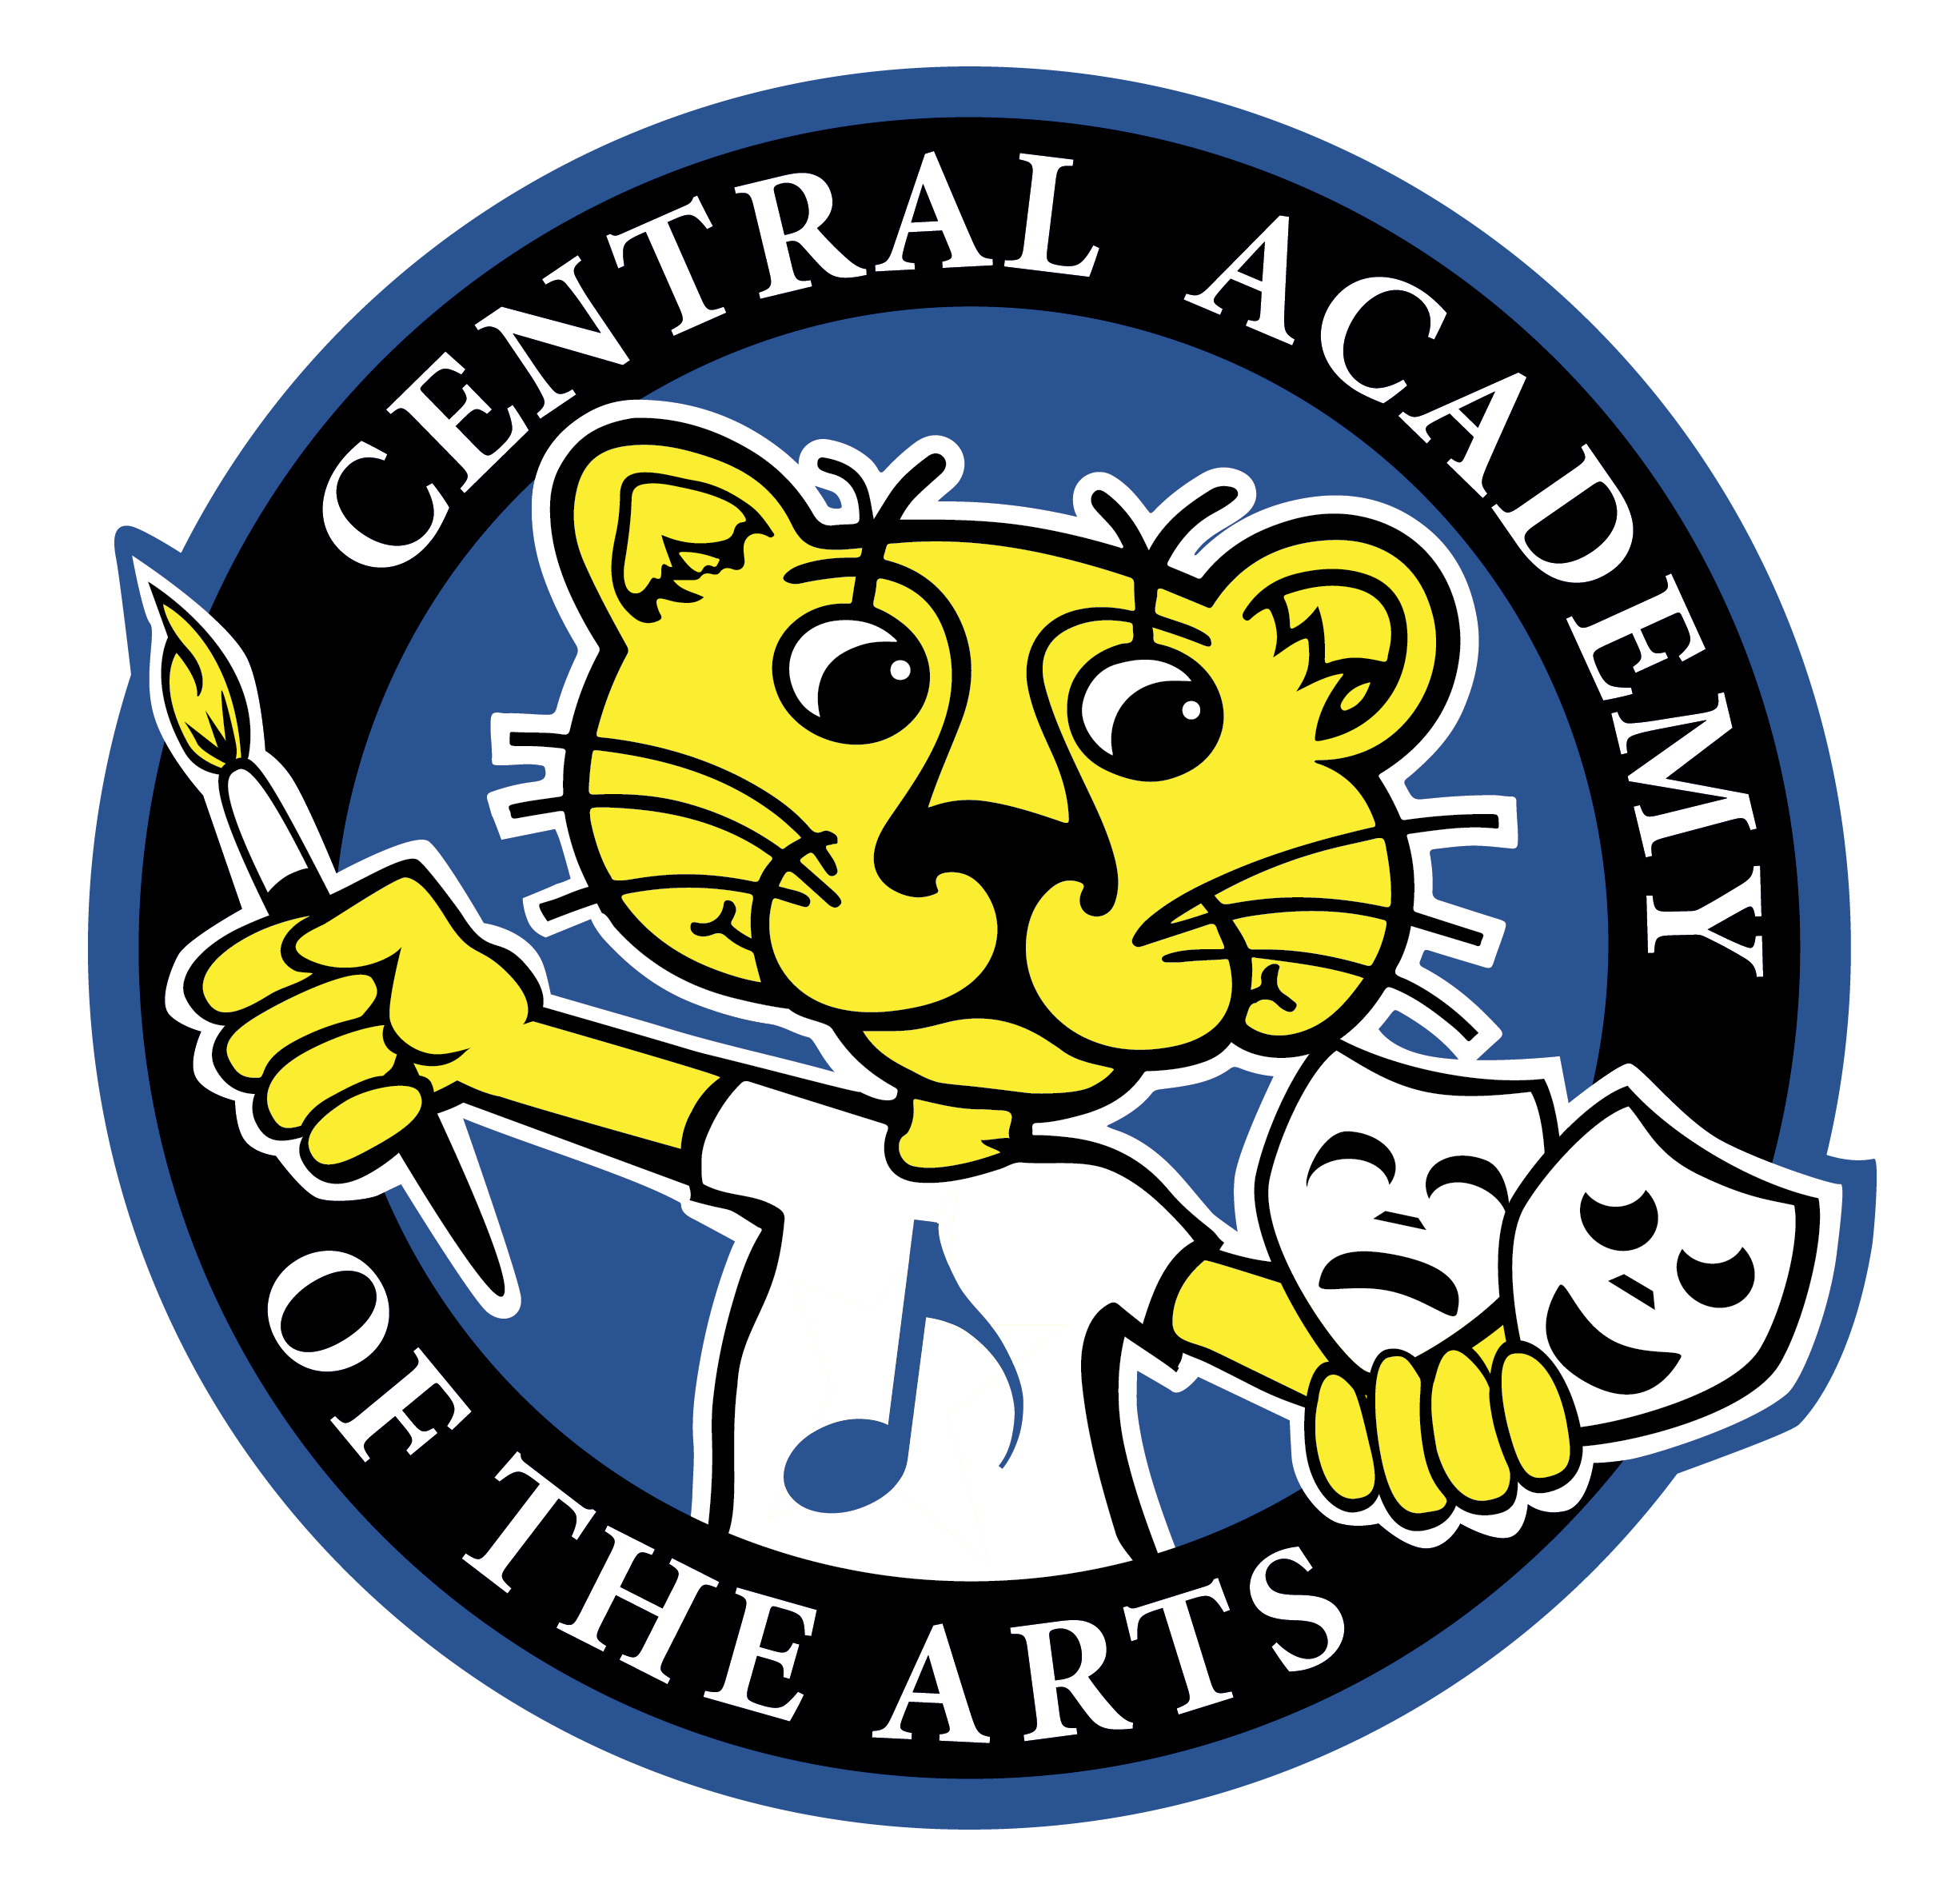 Central Academy of the Arts logo